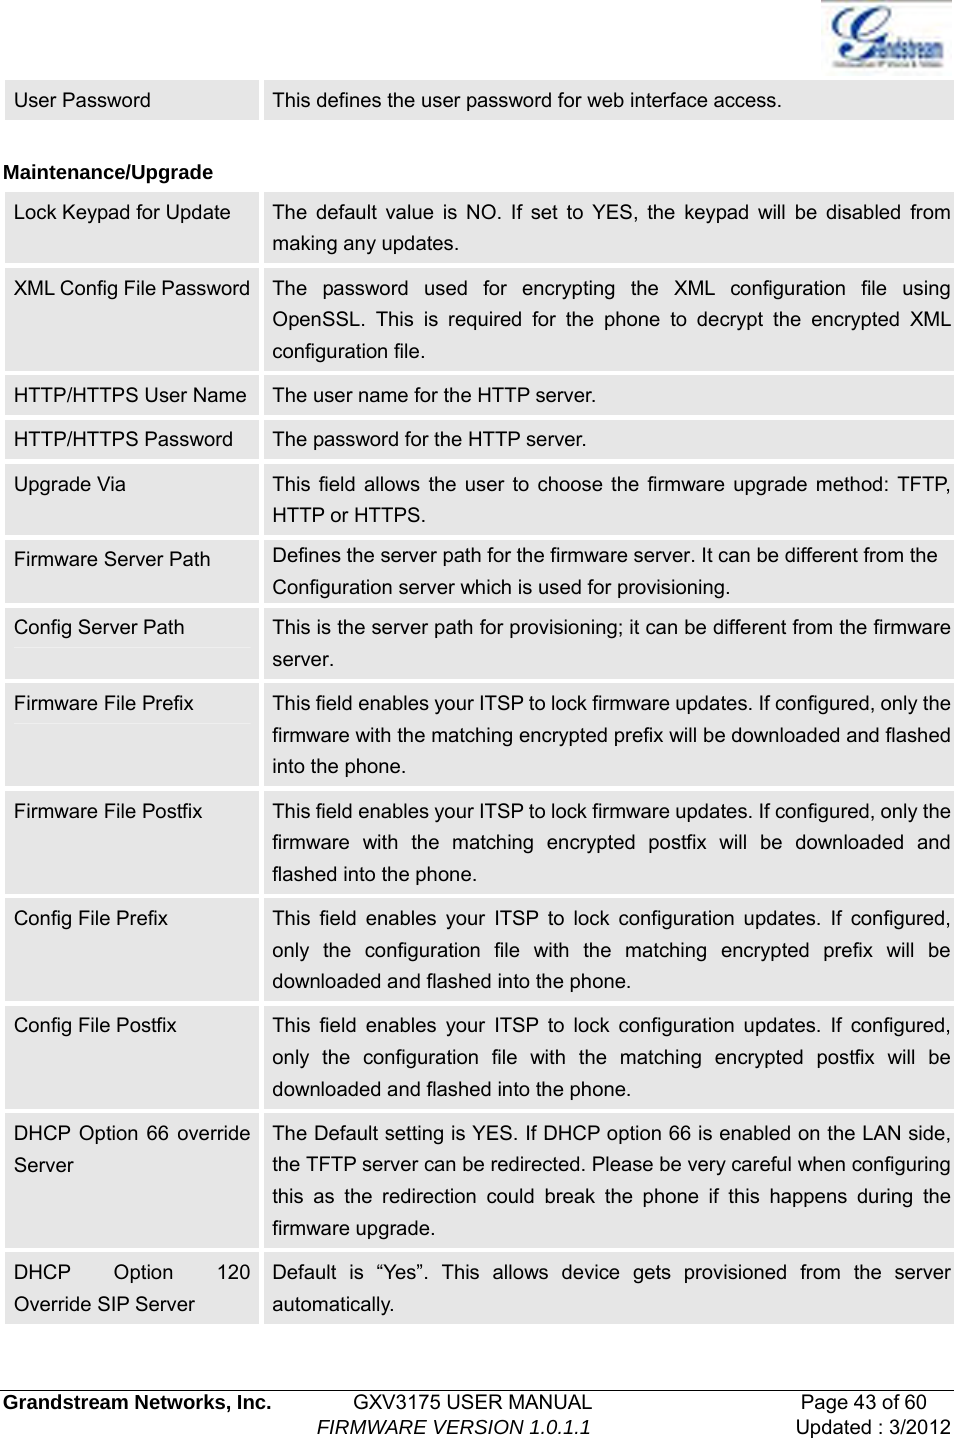   Grandstream Networks, Inc.        GXV3175 USER MANUAL                     Page 43 of 60                                FIRMWARE VERSION 1.0.1.1 Updated : 3/2012  User Password  This defines the user password for web interface access.  Maintenance/Upgrade Lock Keypad for Update  The default value is NO. If set to YES, the keypad will be disabled from making any updates. XML Config File Password  The password used for encrypting the XML configuration file using OpenSSL. This is required for the phone to decrypt the encrypted XML configuration file.   HTTP/HTTPS User Name  The user name for the HTTP server. HTTP/HTTPS Password  The password for the HTTP server. Upgrade Via  This field allows the user to choose the firmware upgrade method: TFTP, HTTP or HTTPS. Firmware Server Path  Defines the server path for the firmware server. It can be different from the Configuration server which is used for provisioning. Config Server Path  This is the server path for provisioning; it can be different from the firmware server. Firmware File Prefix  This field enables your ITSP to lock firmware updates. If configured, only the firmware with the matching encrypted prefix will be downloaded and flashed into the phone. Firmware File Postfix  This field enables your ITSP to lock firmware updates. If configured, only the firmware with the matching encrypted postfix will be downloaded and flashed into the phone. Config File Prefix  This field enables your ITSP to lock configuration updates. If configured, only the configuration file with the matching encrypted prefix will be downloaded and flashed into the phone. Config File Postfix  This field enables your ITSP to lock configuration updates. If configured, only the configuration file with the matching encrypted postfix will be downloaded and flashed into the phone. DHCP Option 66 override Server The Default setting is YES. If DHCP option 66 is enabled on the LAN side, the TFTP server can be redirected. Please be very careful when configuring this as the redirection could break the phone if this happens during the firmware upgrade. DHCP Option 120 Override SIP Server Default is “Yes”. This allows device gets provisioned from the server automatically. 